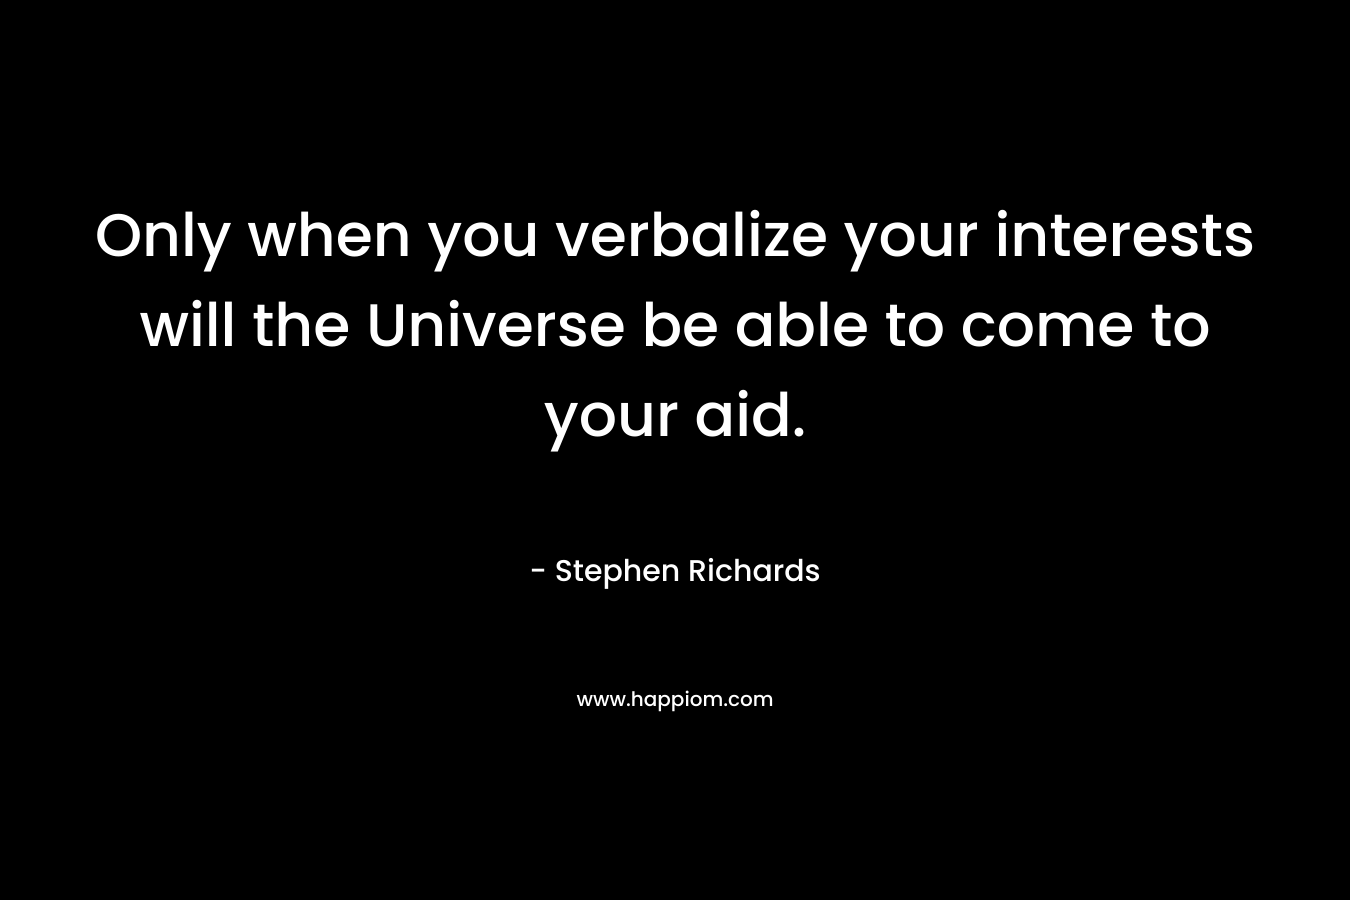 Only when you verbalize your interests will the Universe be able to come to your aid.